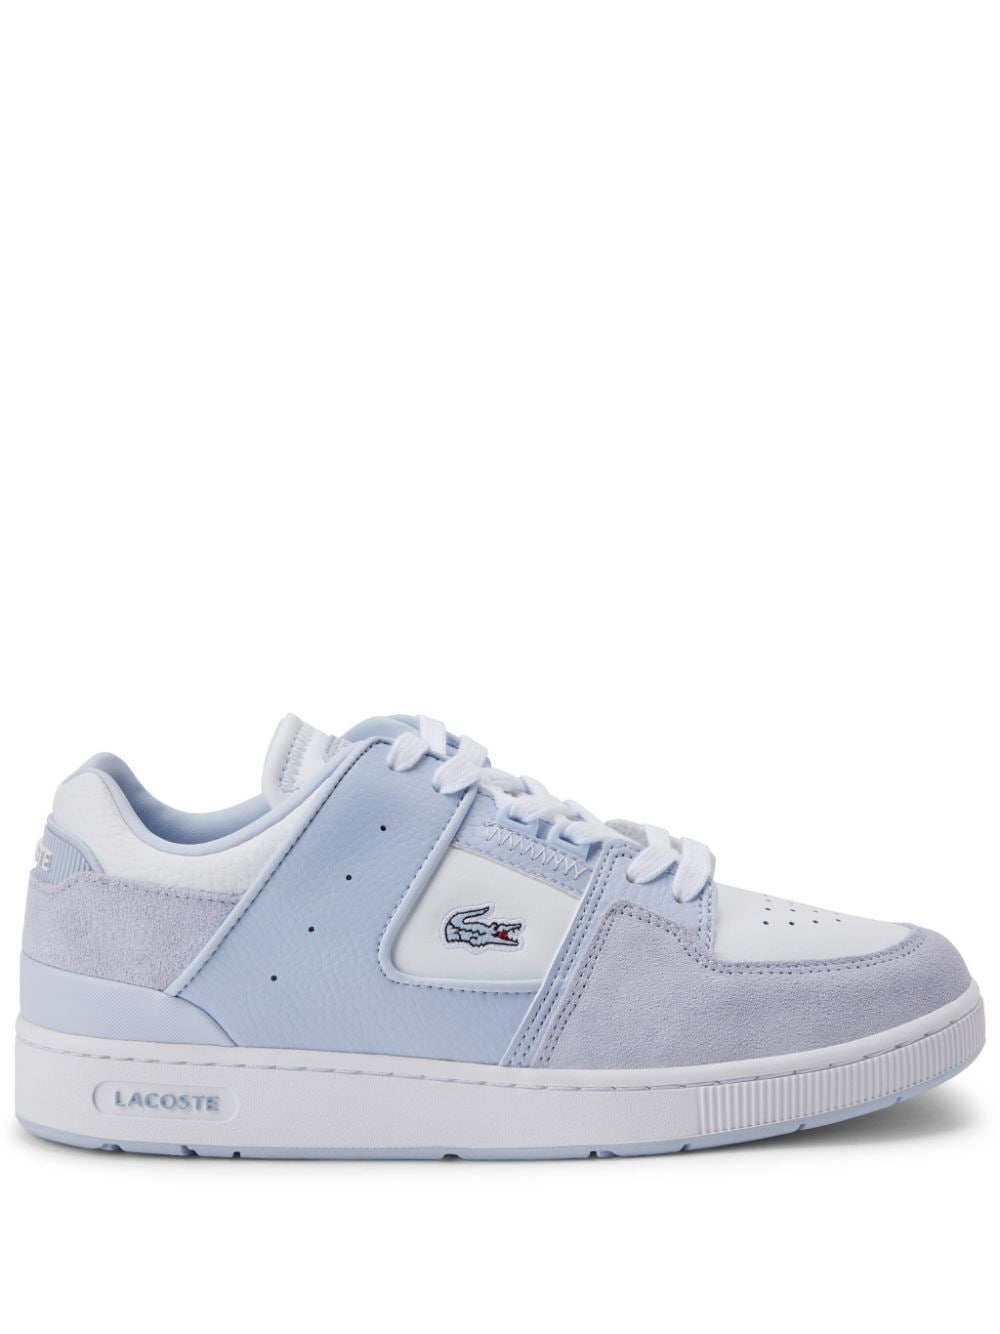 Lacoste Court Cage leather sneakers - Blue von Lacoste